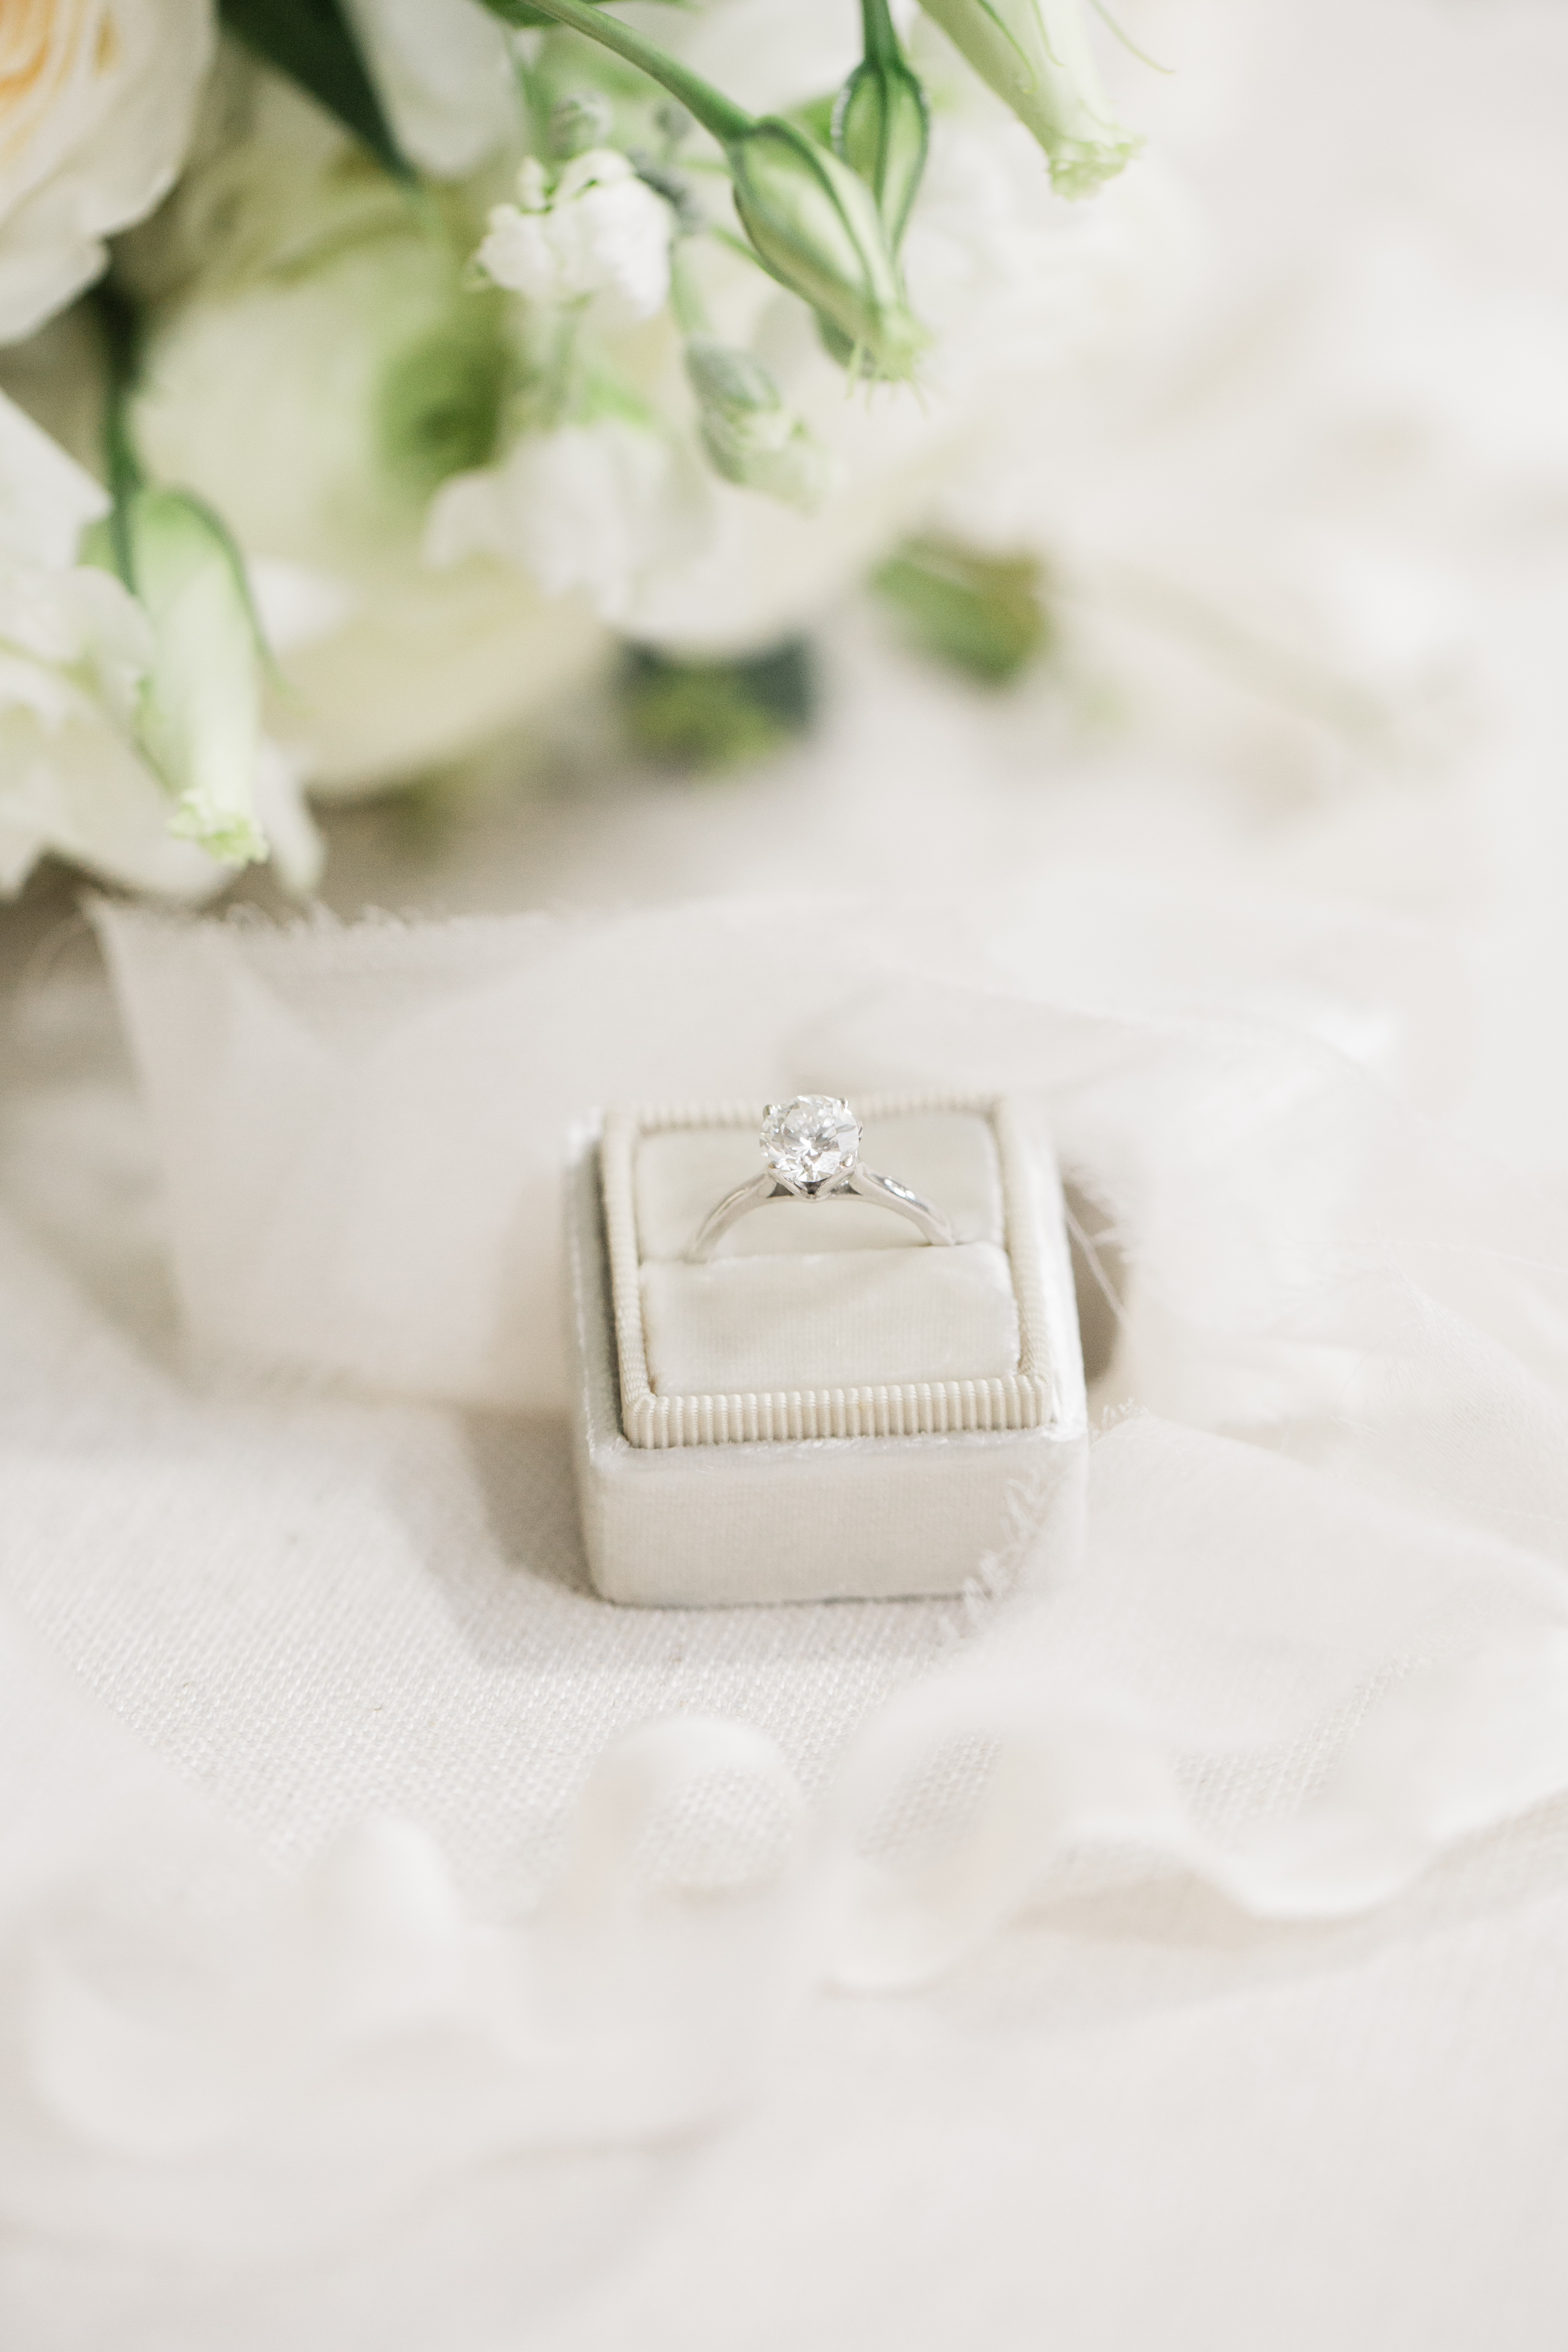 The Mrs Box is the perfect addition to wedding day detail photos.